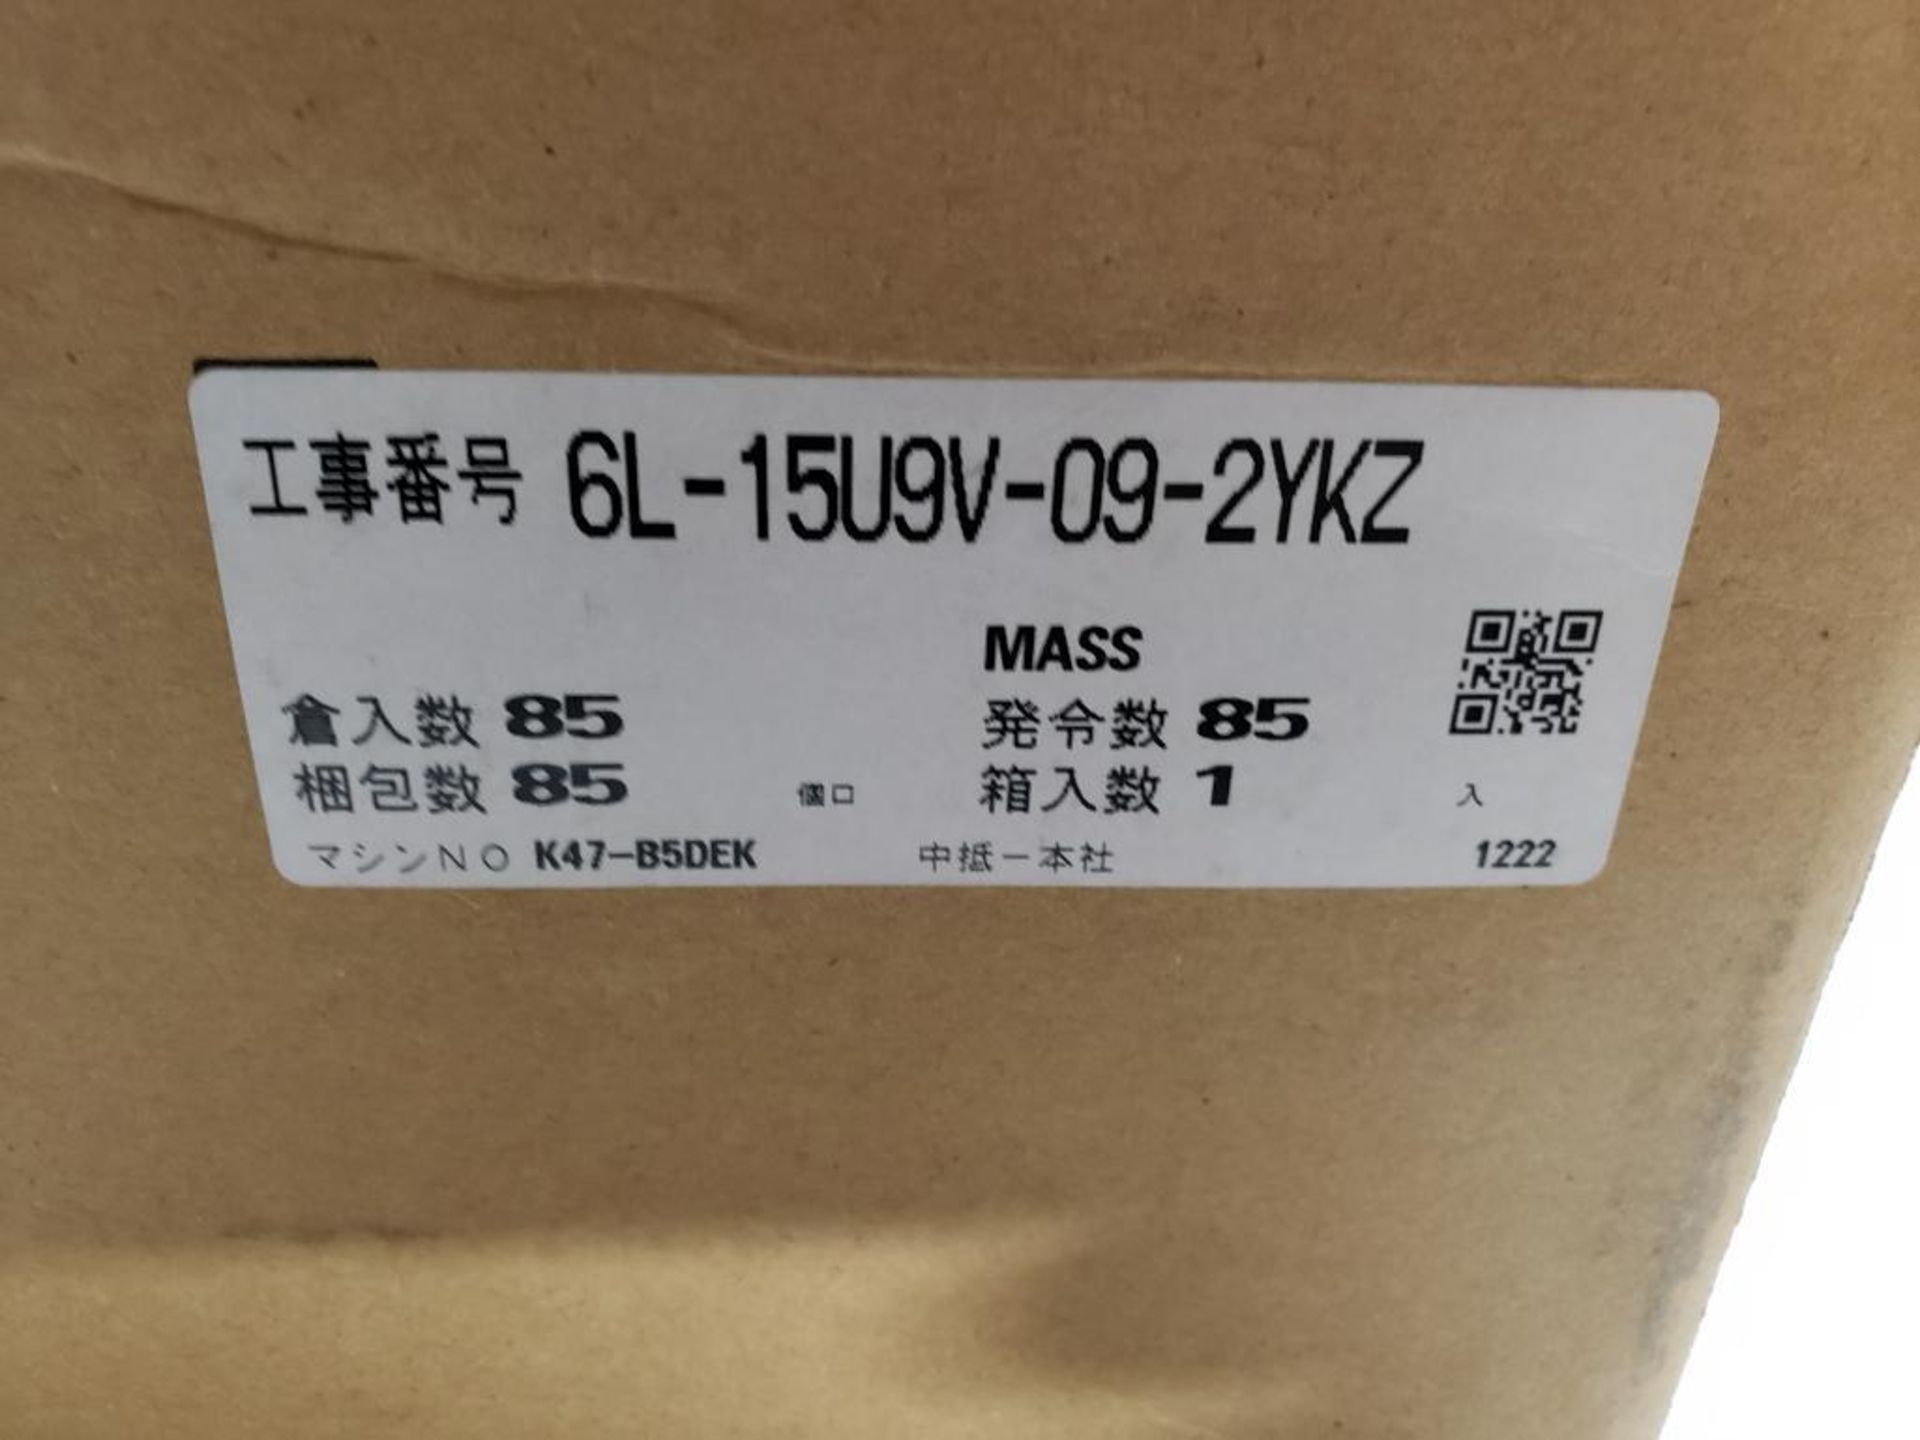 Mitsubishi inverter drive. Part number FR-D740-080-N7. New in box. - Image 3 of 6